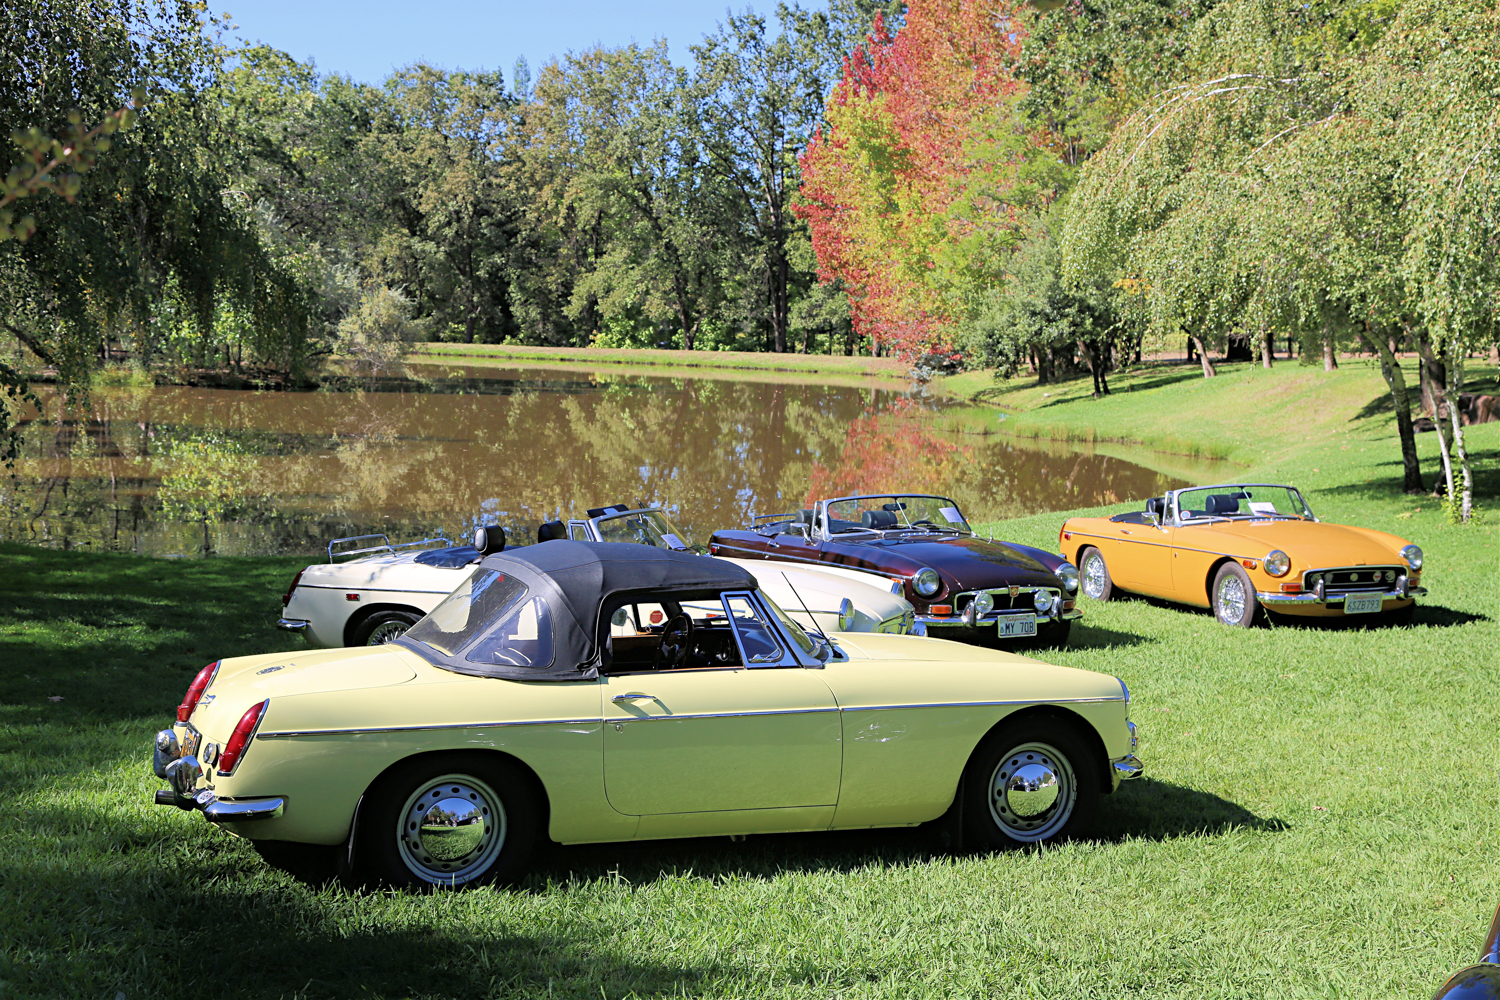 MGB cars on display at the 2022 Ironstone Concours